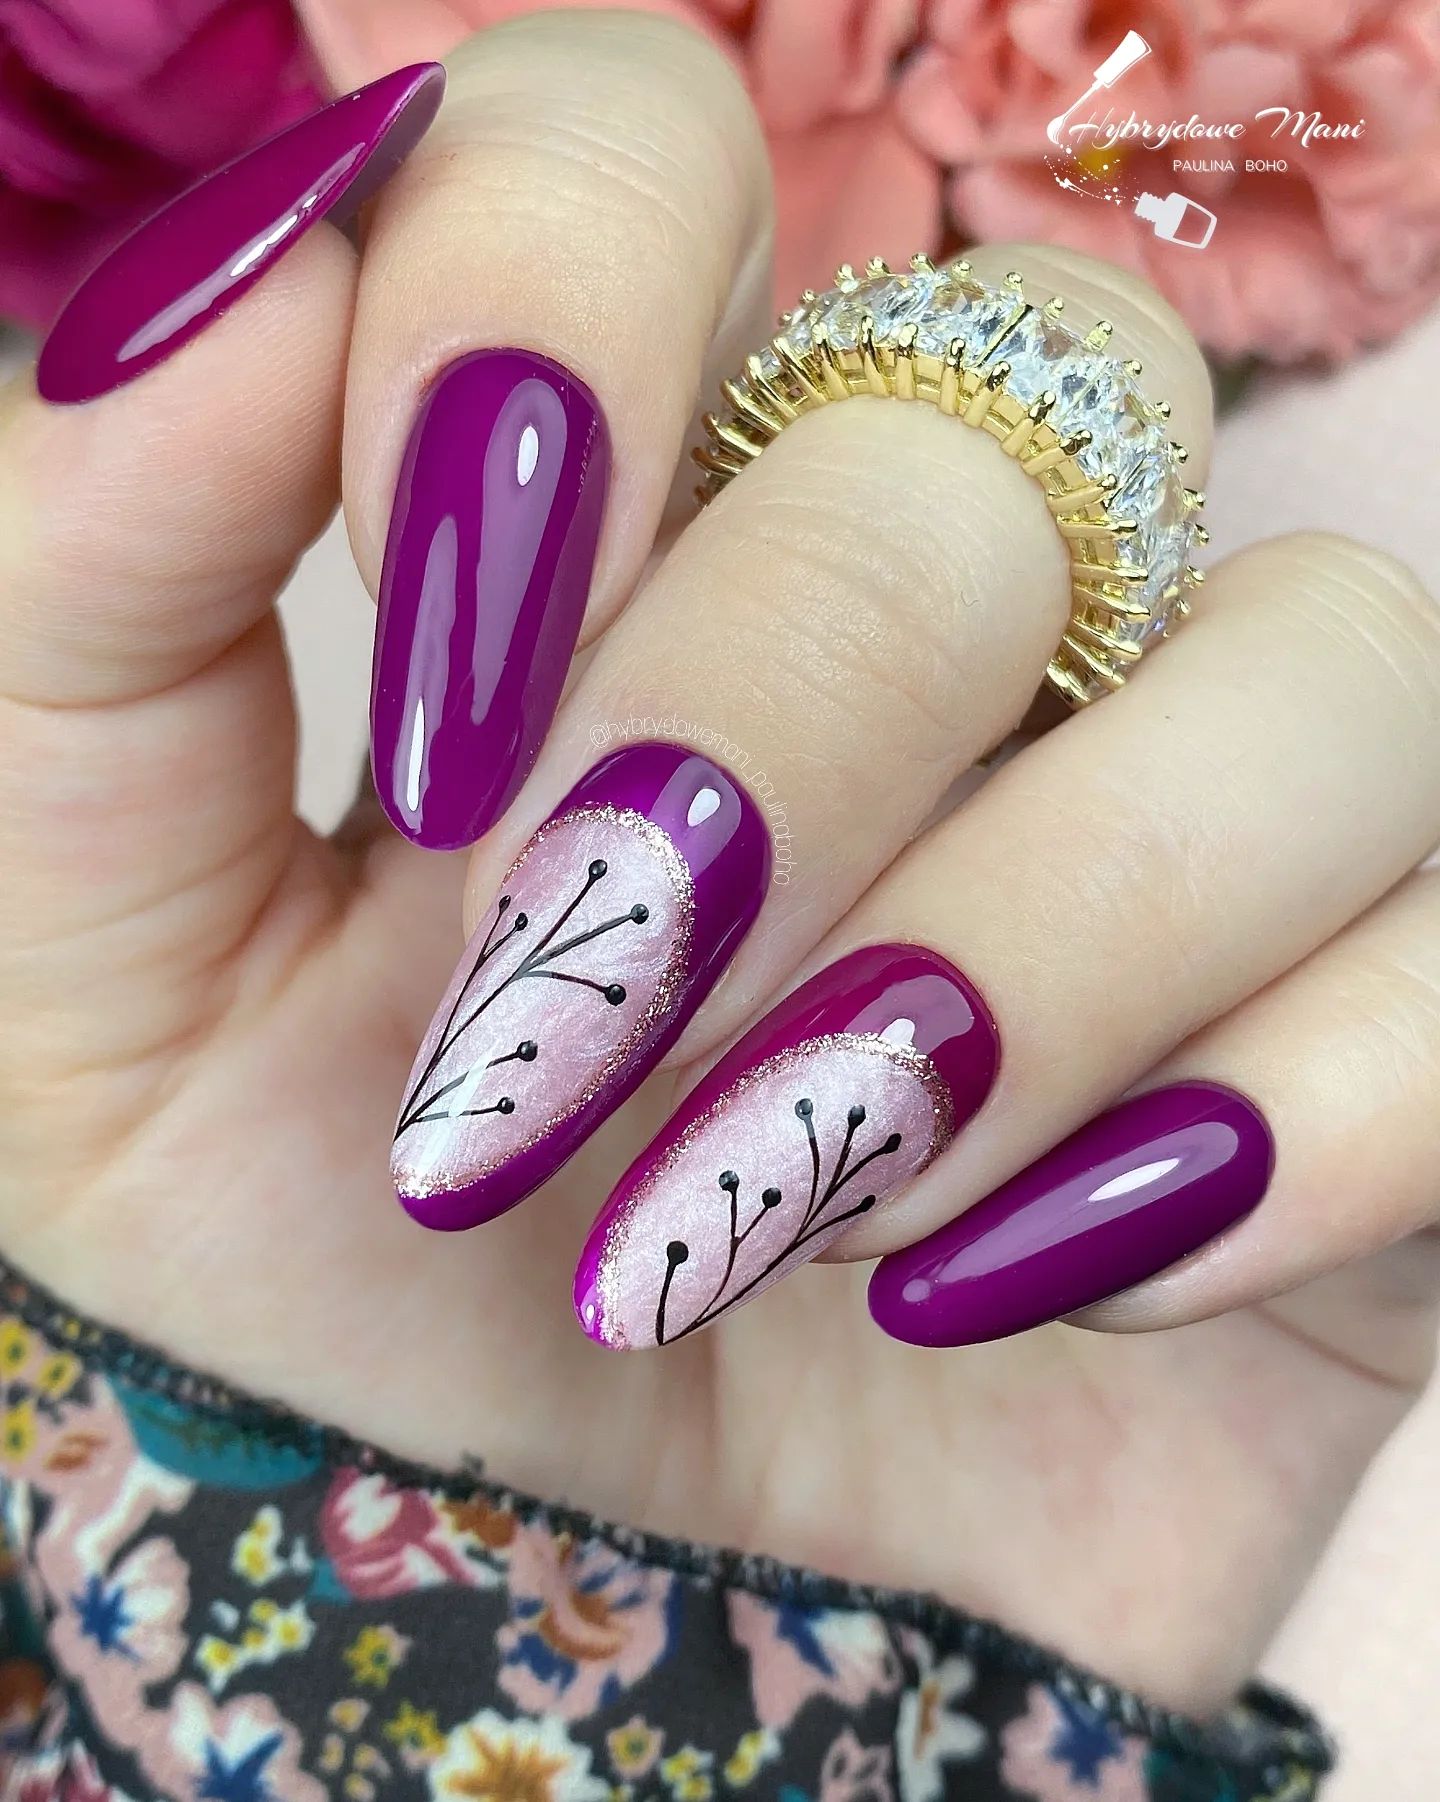 20 Purple Nail Designs for Your Next Manicure